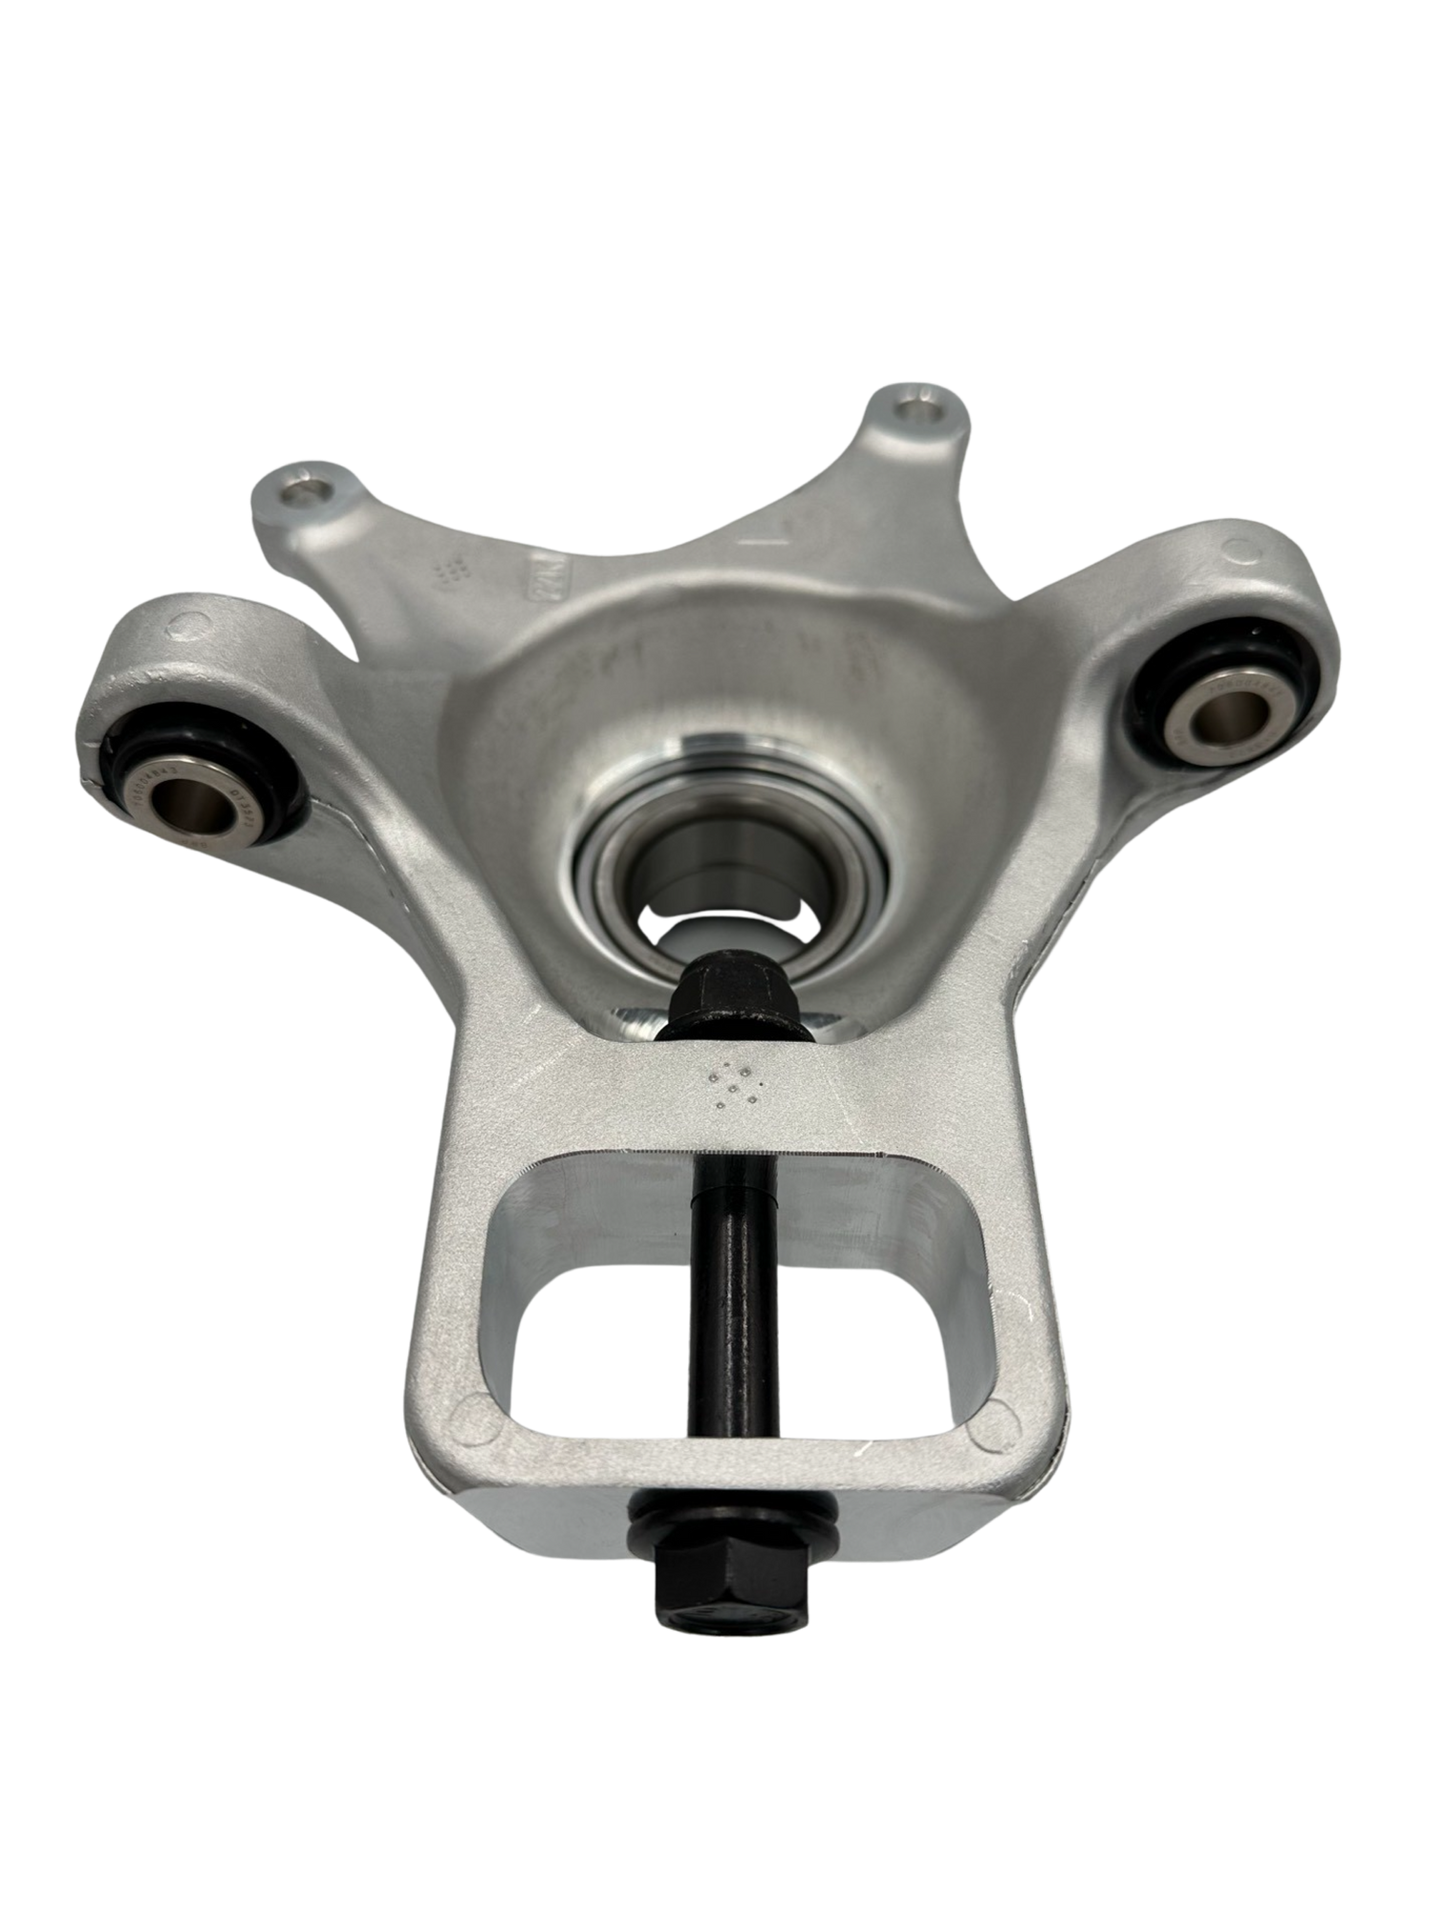 2022+ Can Am Rear Double Shear Knuckle - Complete with Bearing and Joints